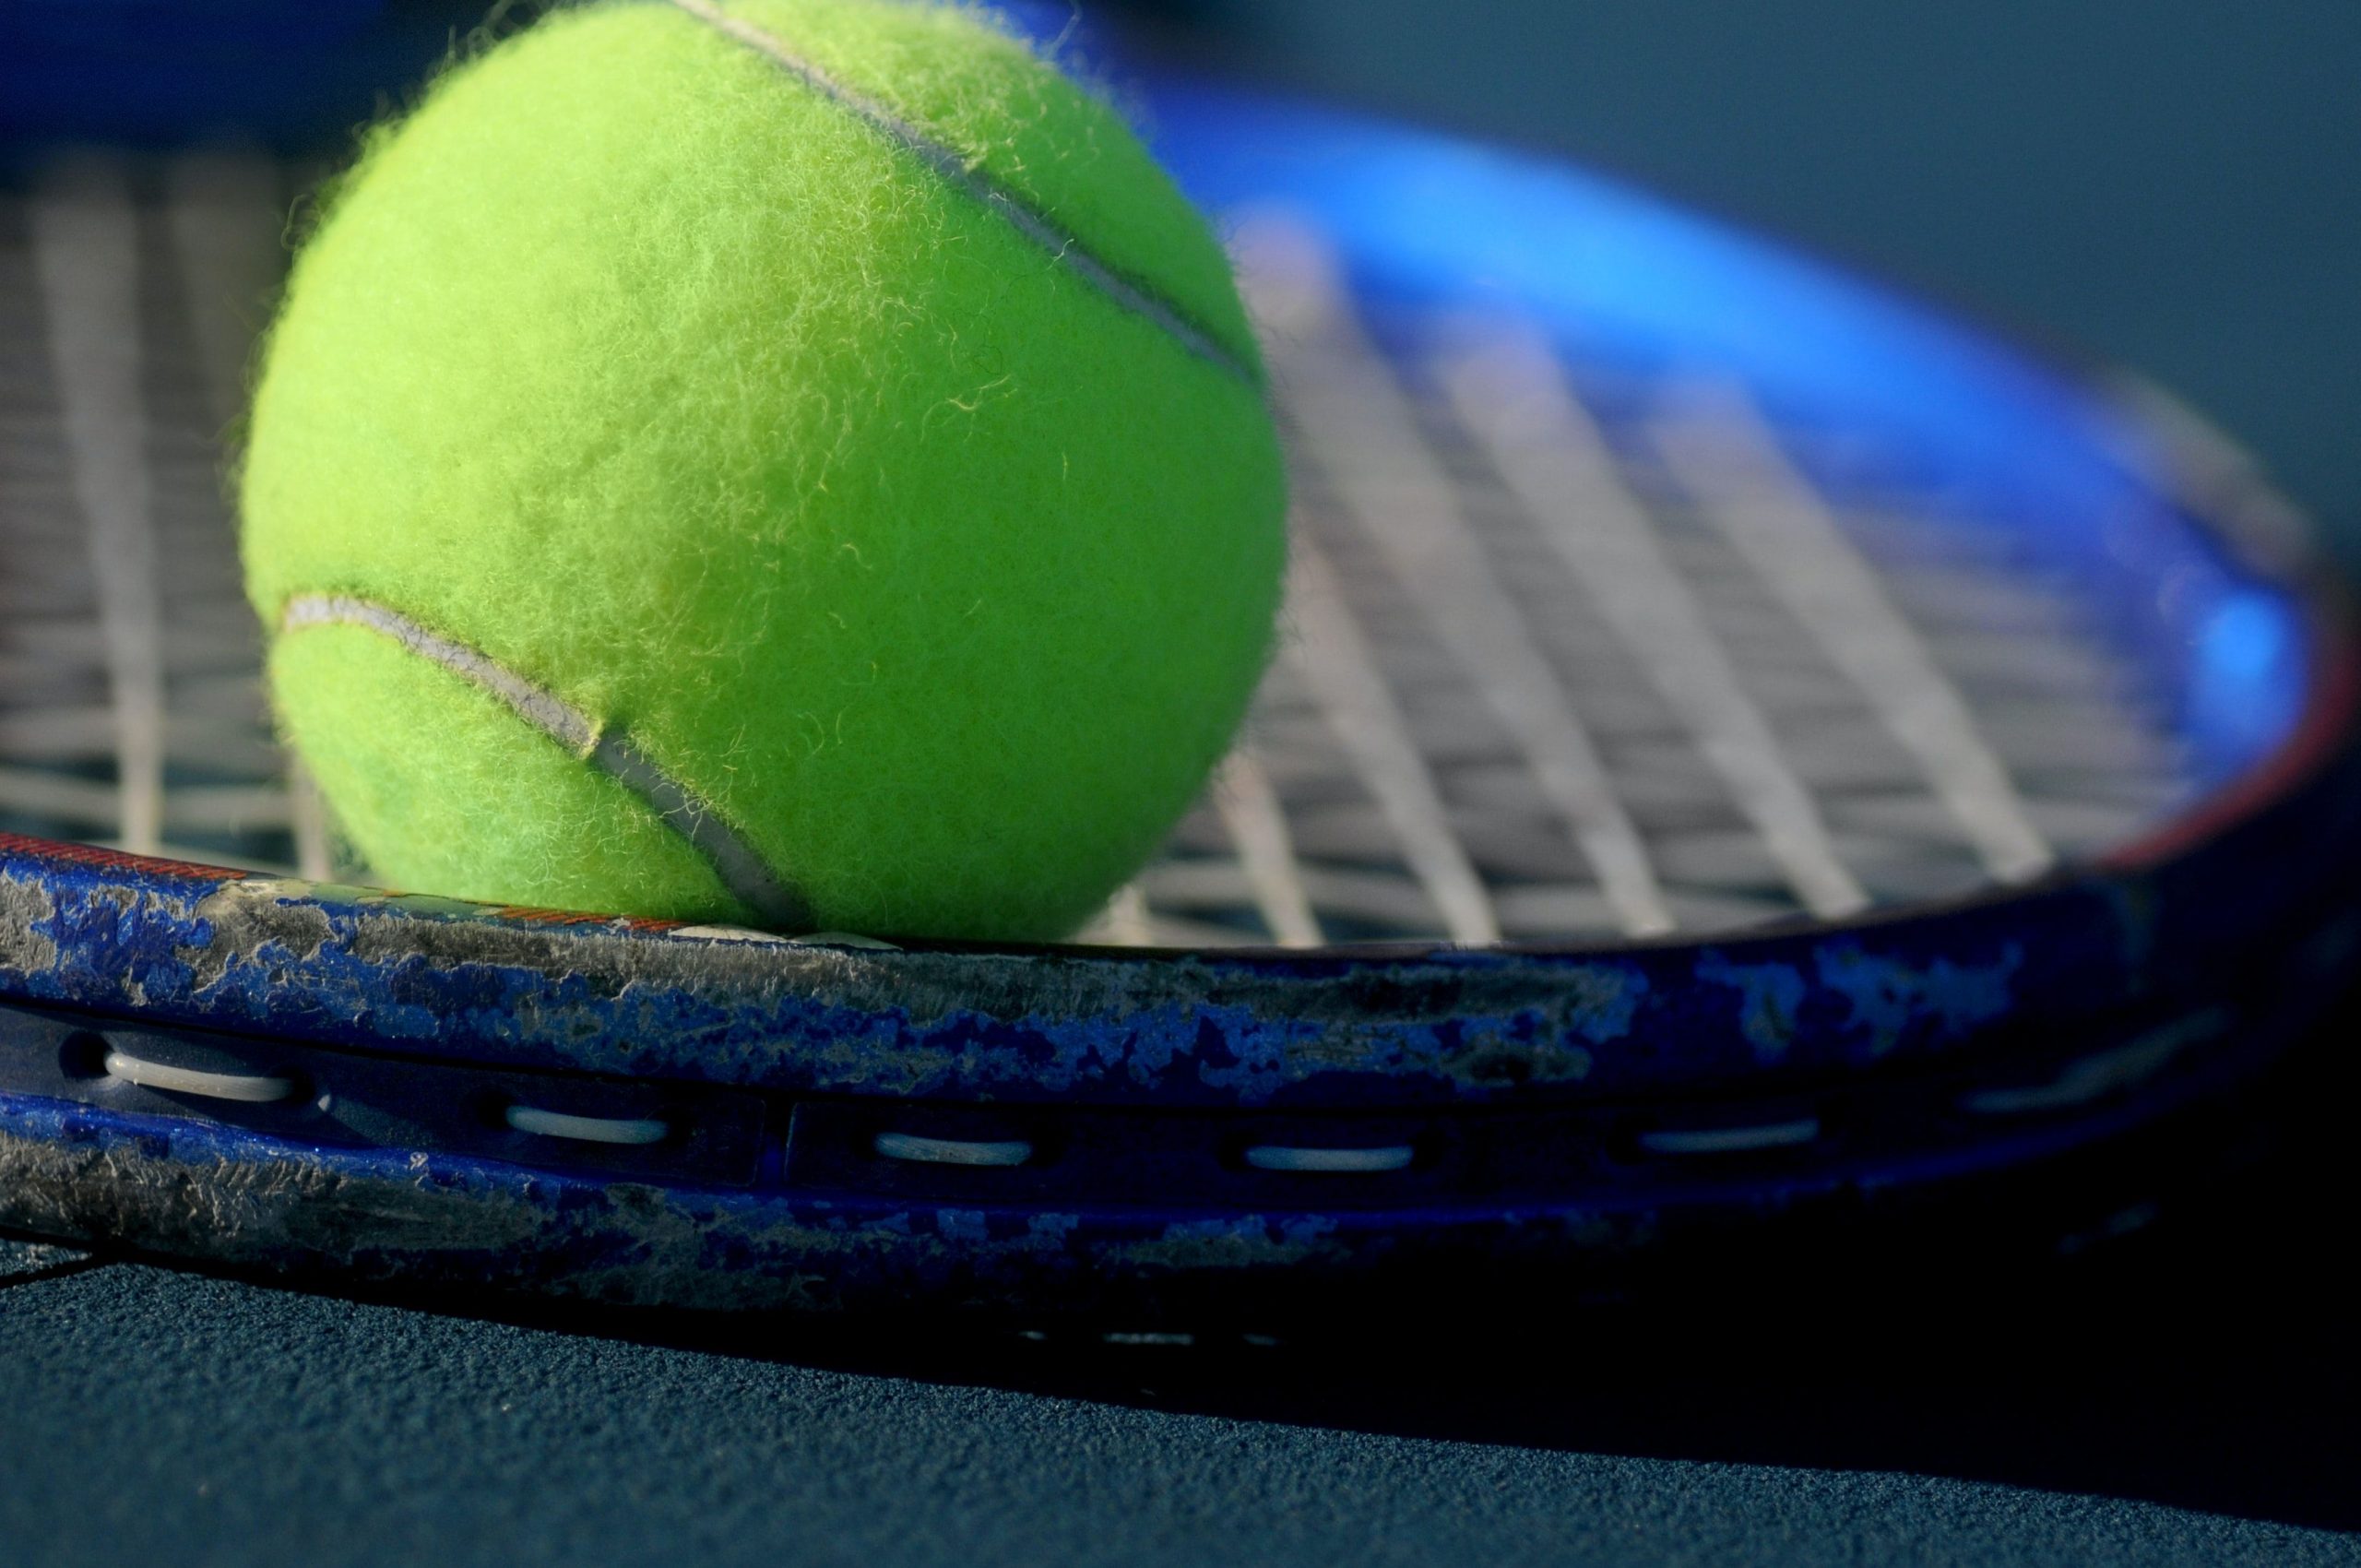 Two tennis players test positive for COVID-19 at Australian Open